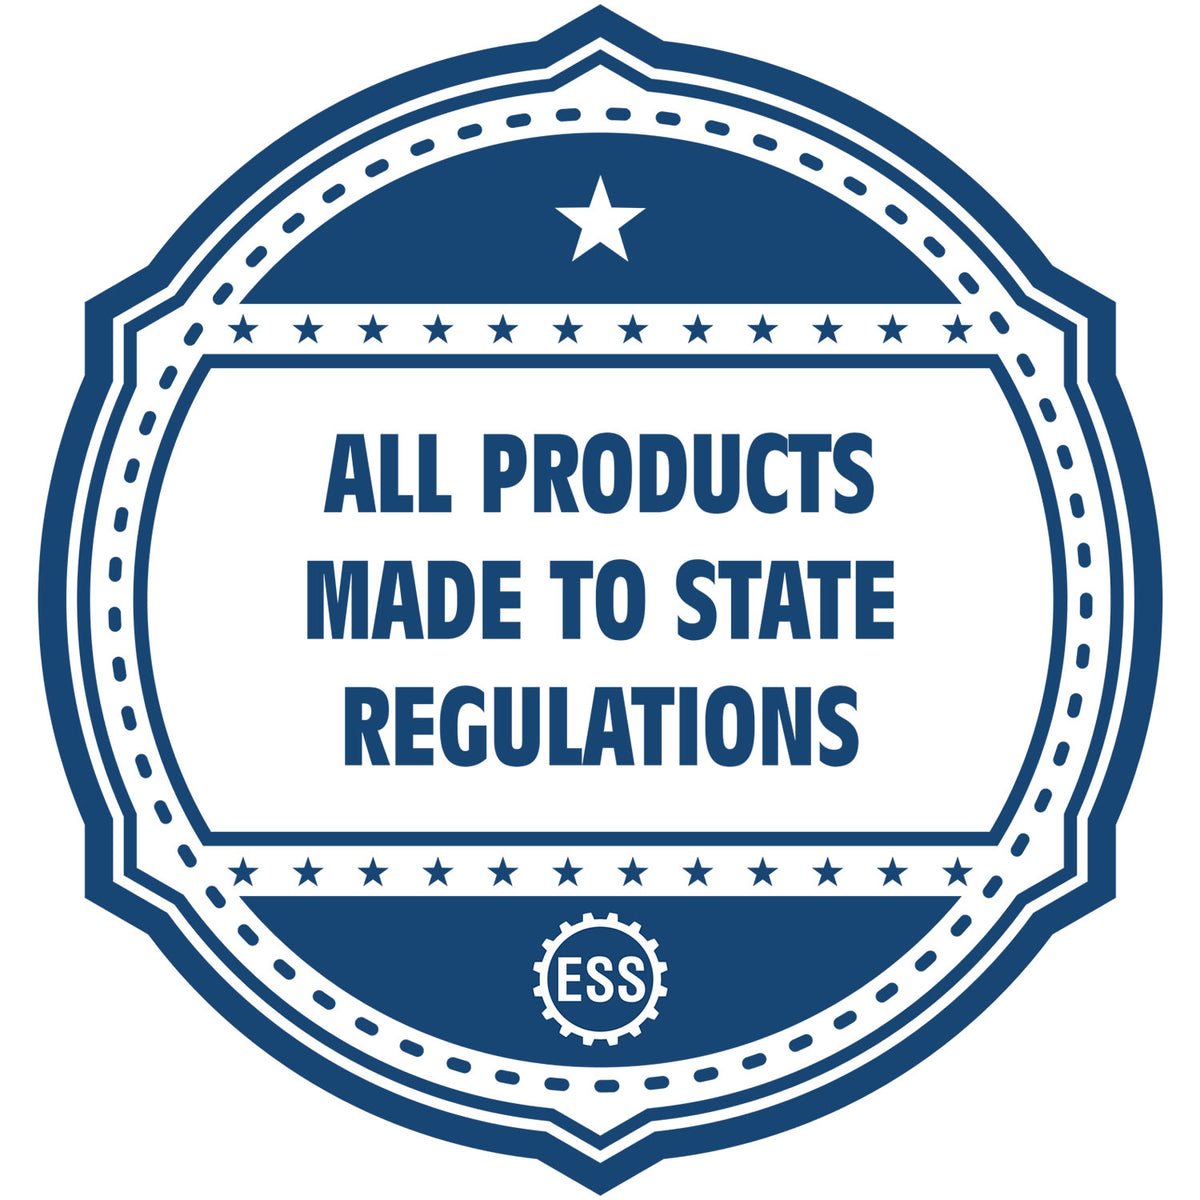 A blue icon or badge for the Iowa Professional Geologist Seal Stamp showing that this product is made in compliance with state regulations.